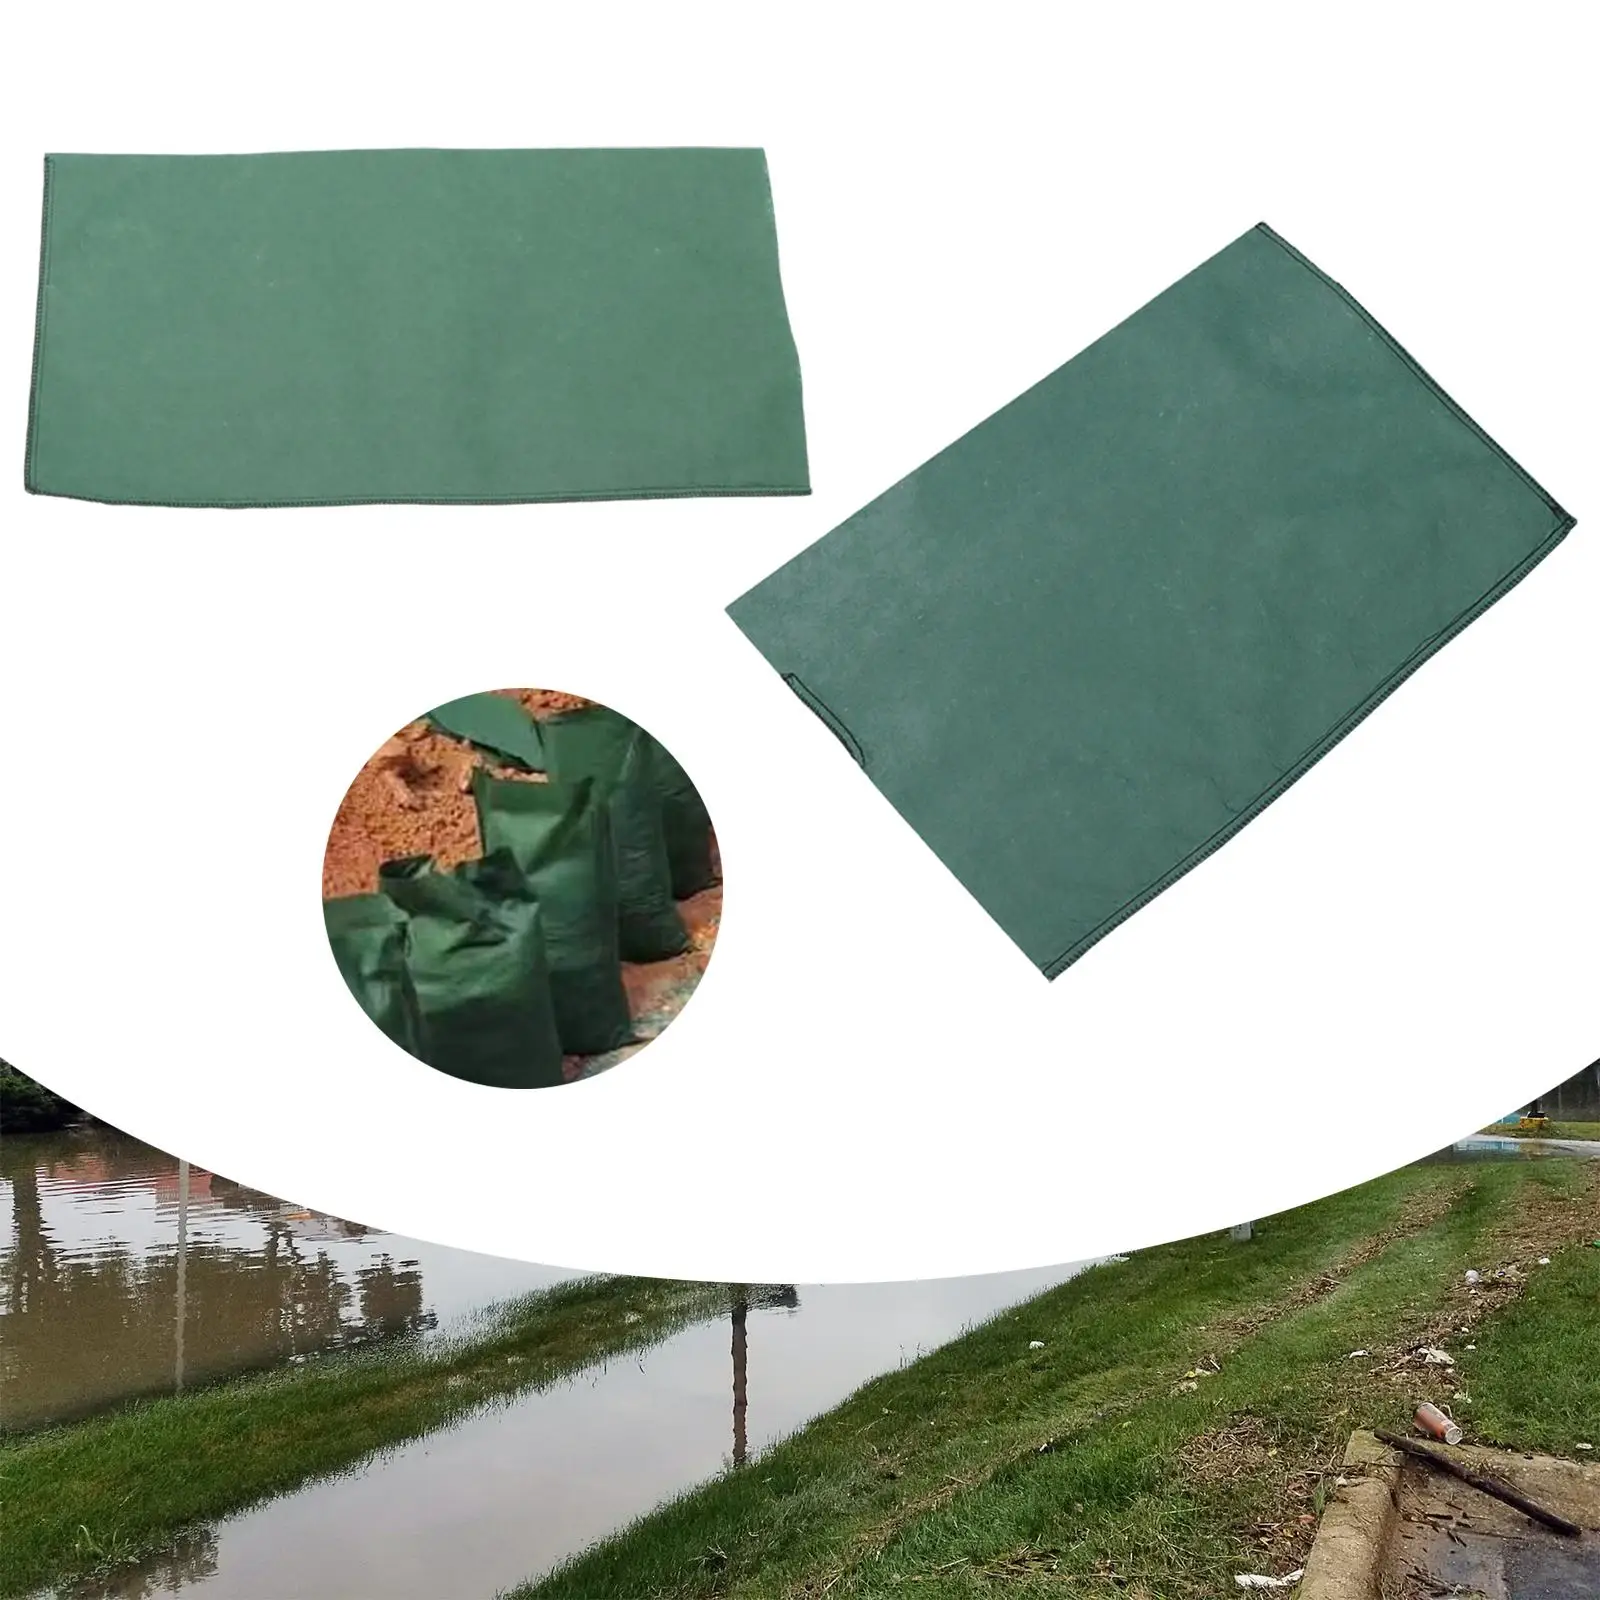 Water Barriers Empty for Garage Basement Protection Canvas Sandbag Heavy Duty